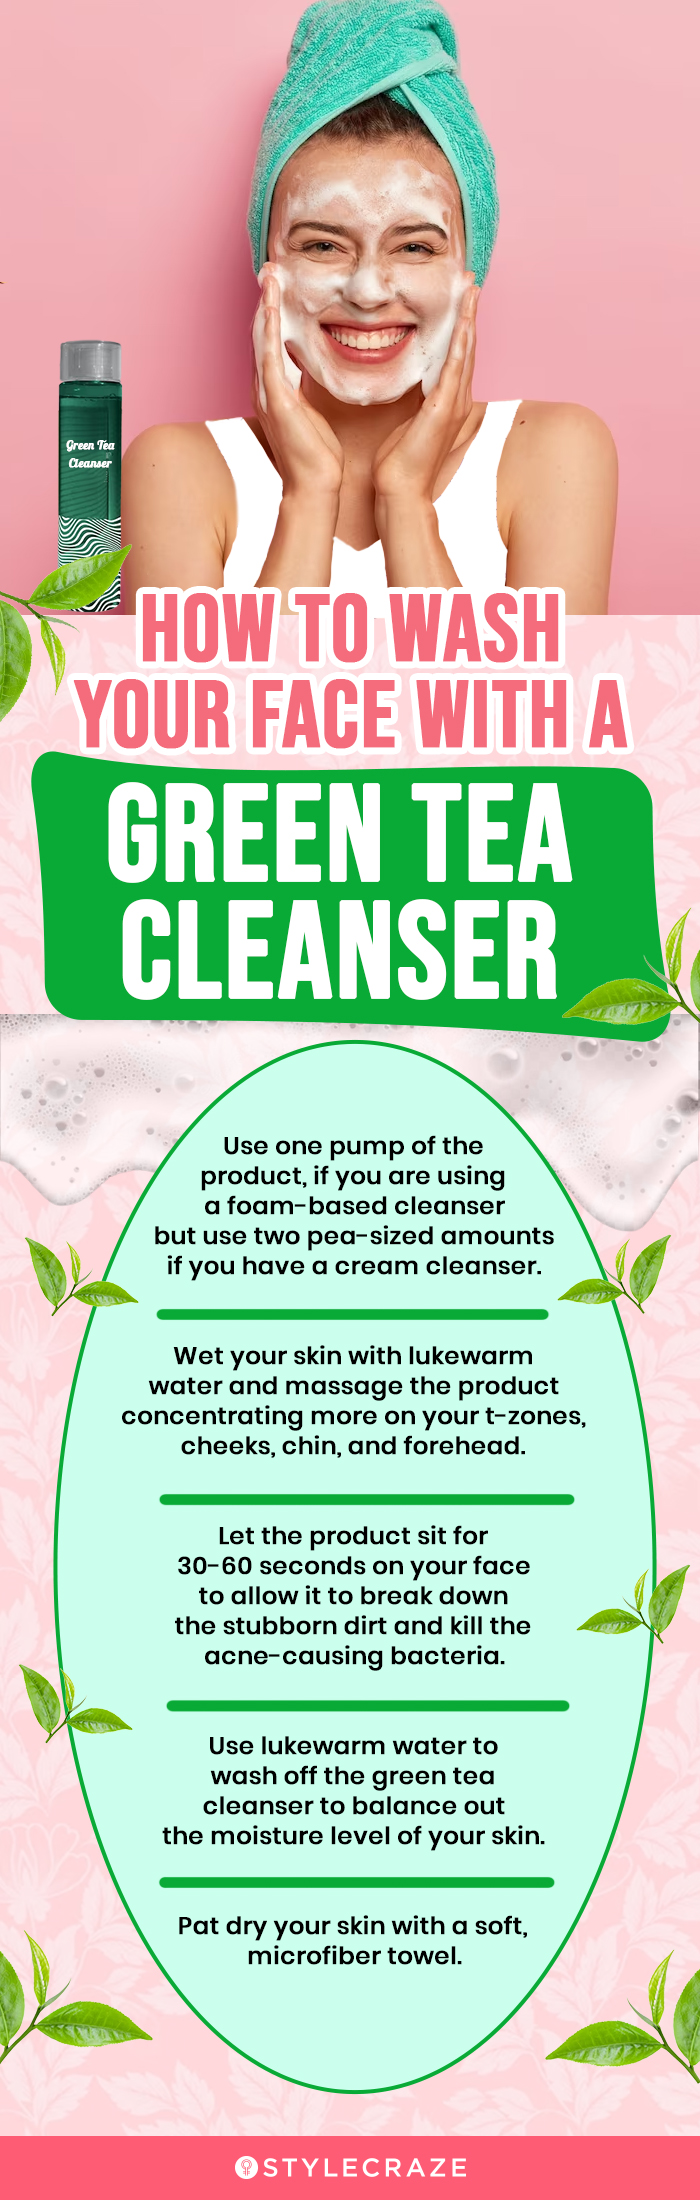 How To Wash Your Face With A Green Tea Cleanser (infographic)